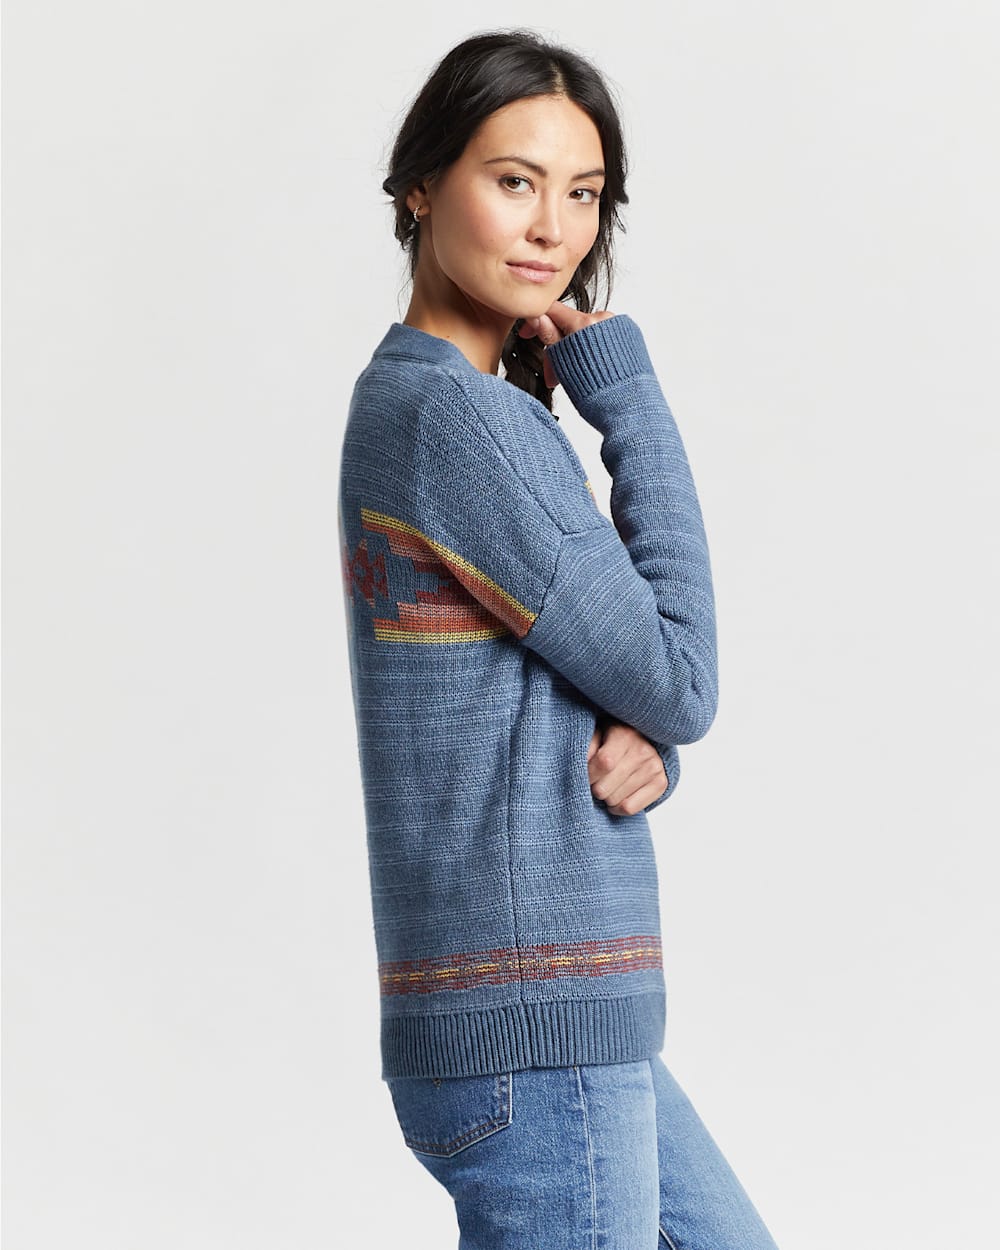 ALTERNATE VIEW OF WOMEN'S V-NECK HENLEY GRAPHIC SWEATER IN BLUE MULTI image number 3